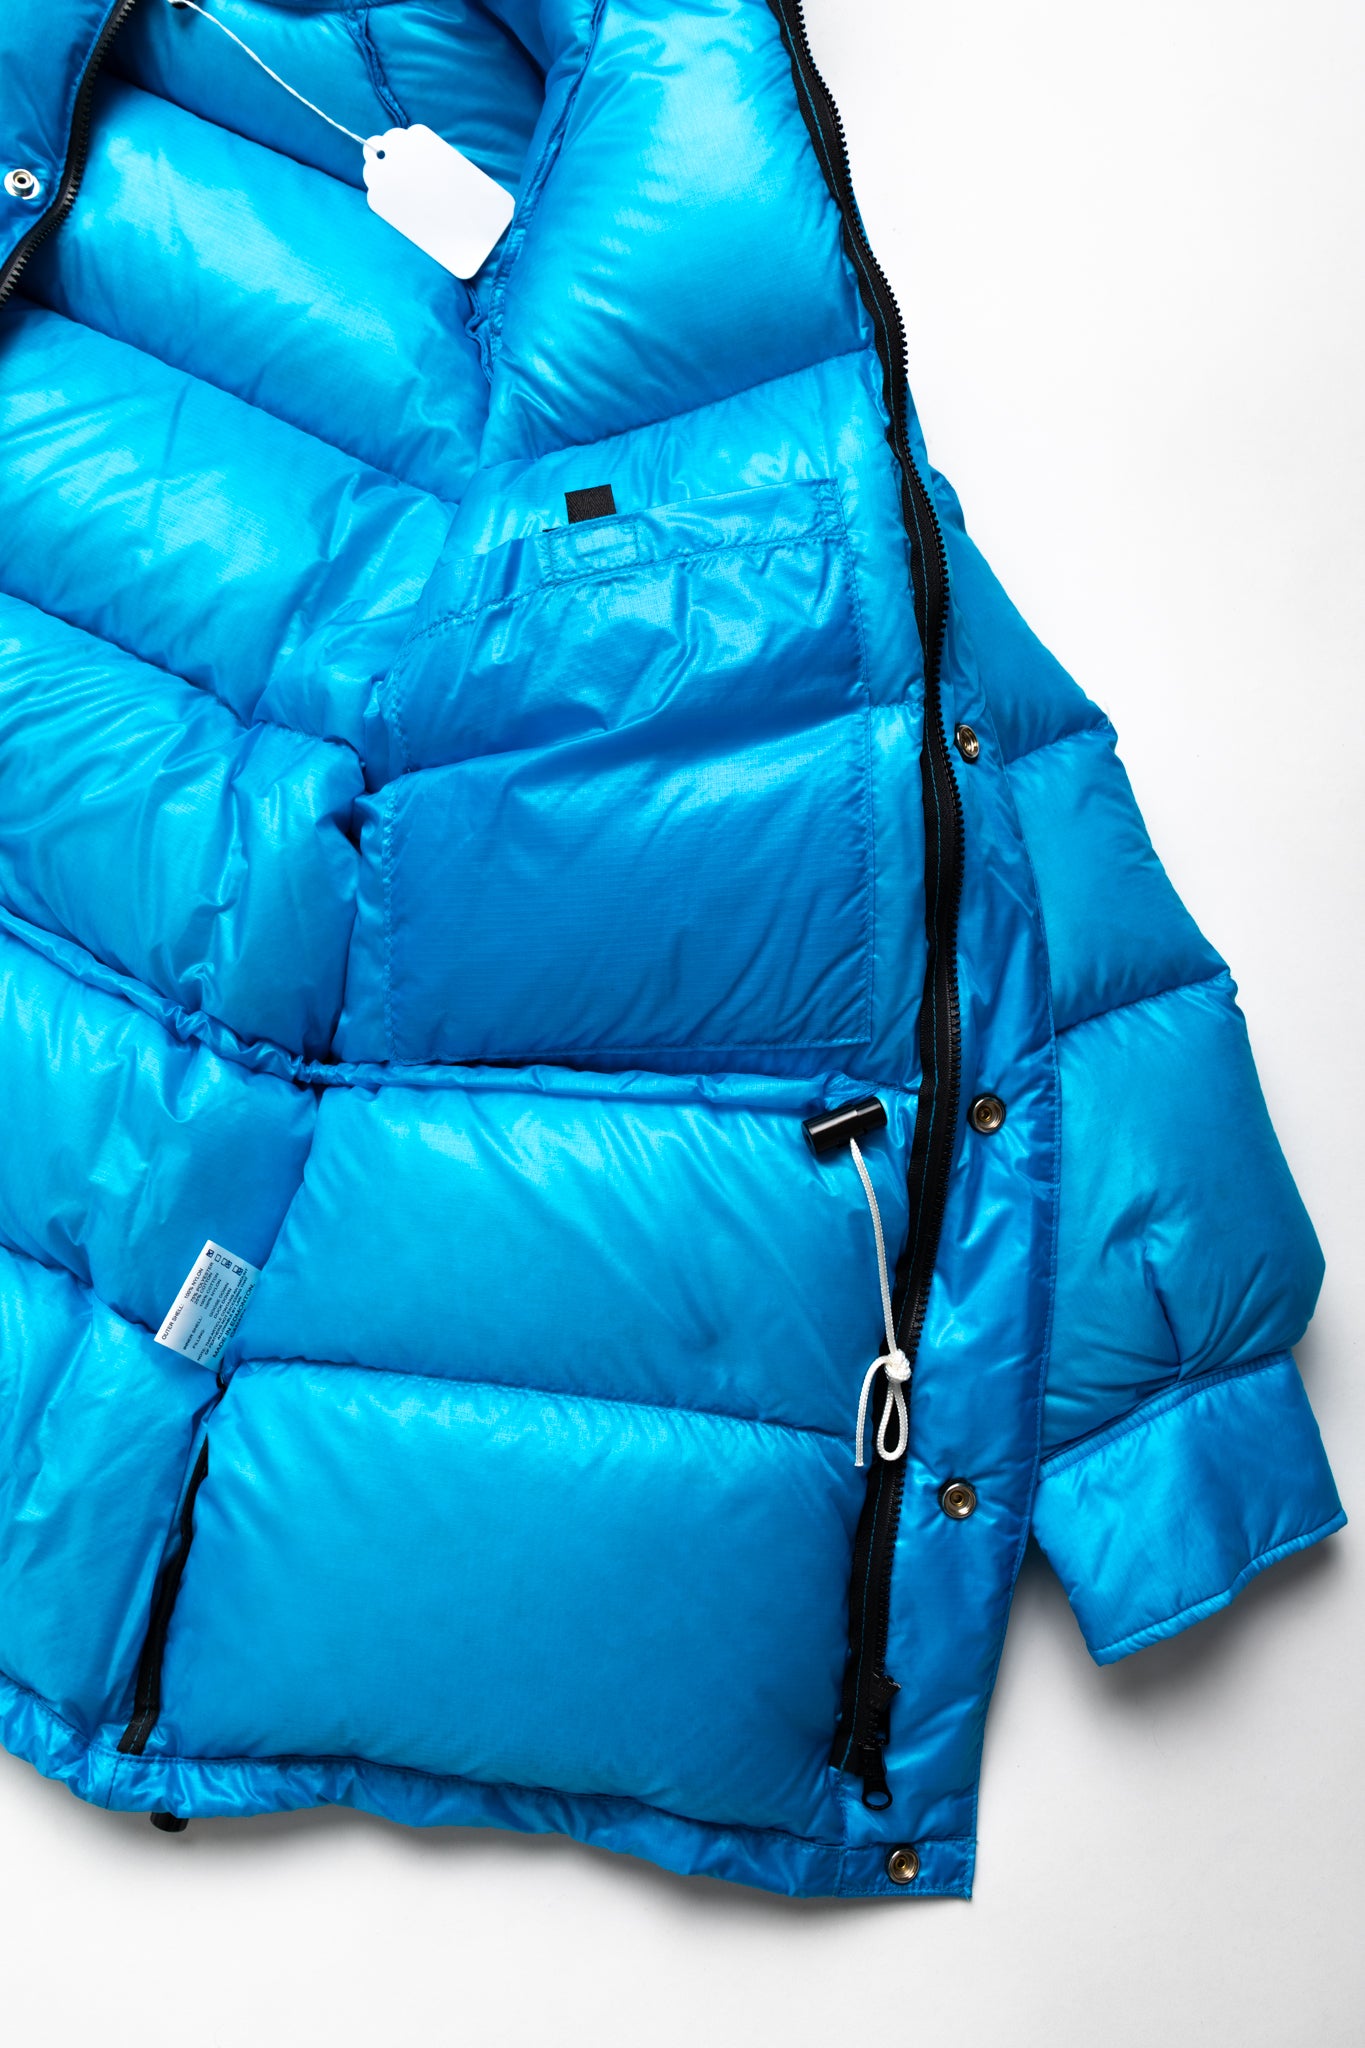 Outer Parka - Turquoise